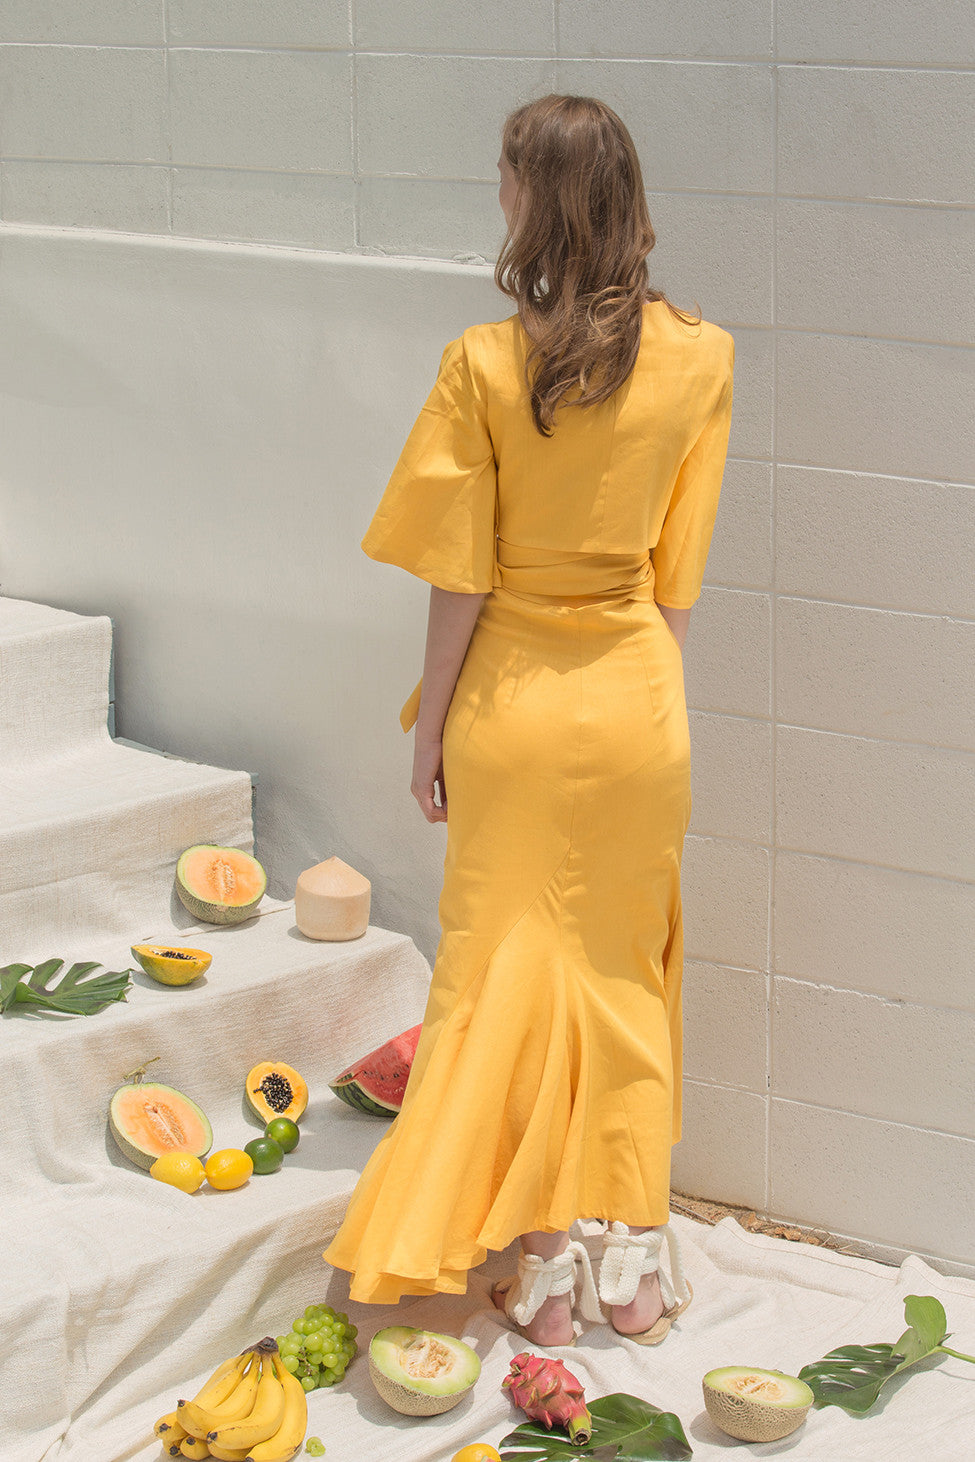 The Martyna Skirt in Yellow featuring ruffle pleats in fluted edge, concealed side zip closure, high waist in ankle length. Partial lined.